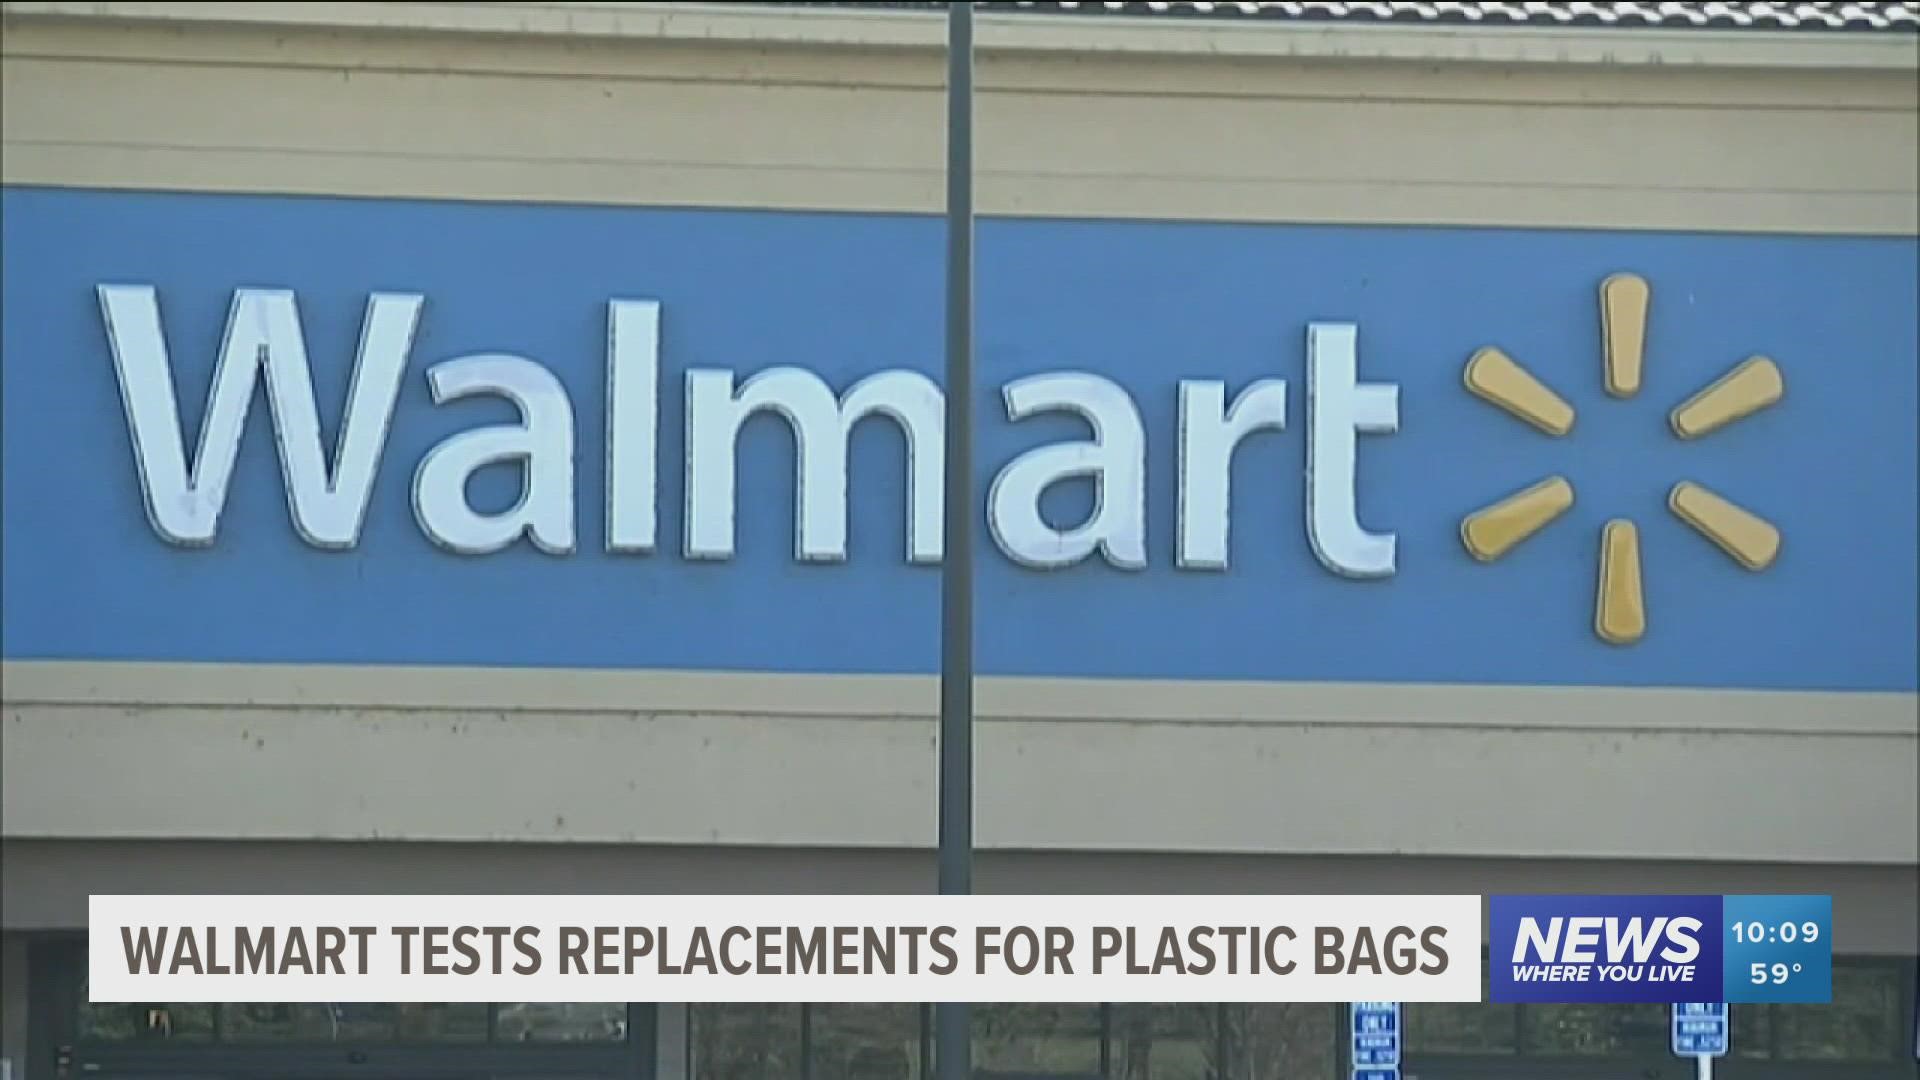 Walmart is testing a new replacement for single-use plastic shopping bags that will also benefit local organizations.